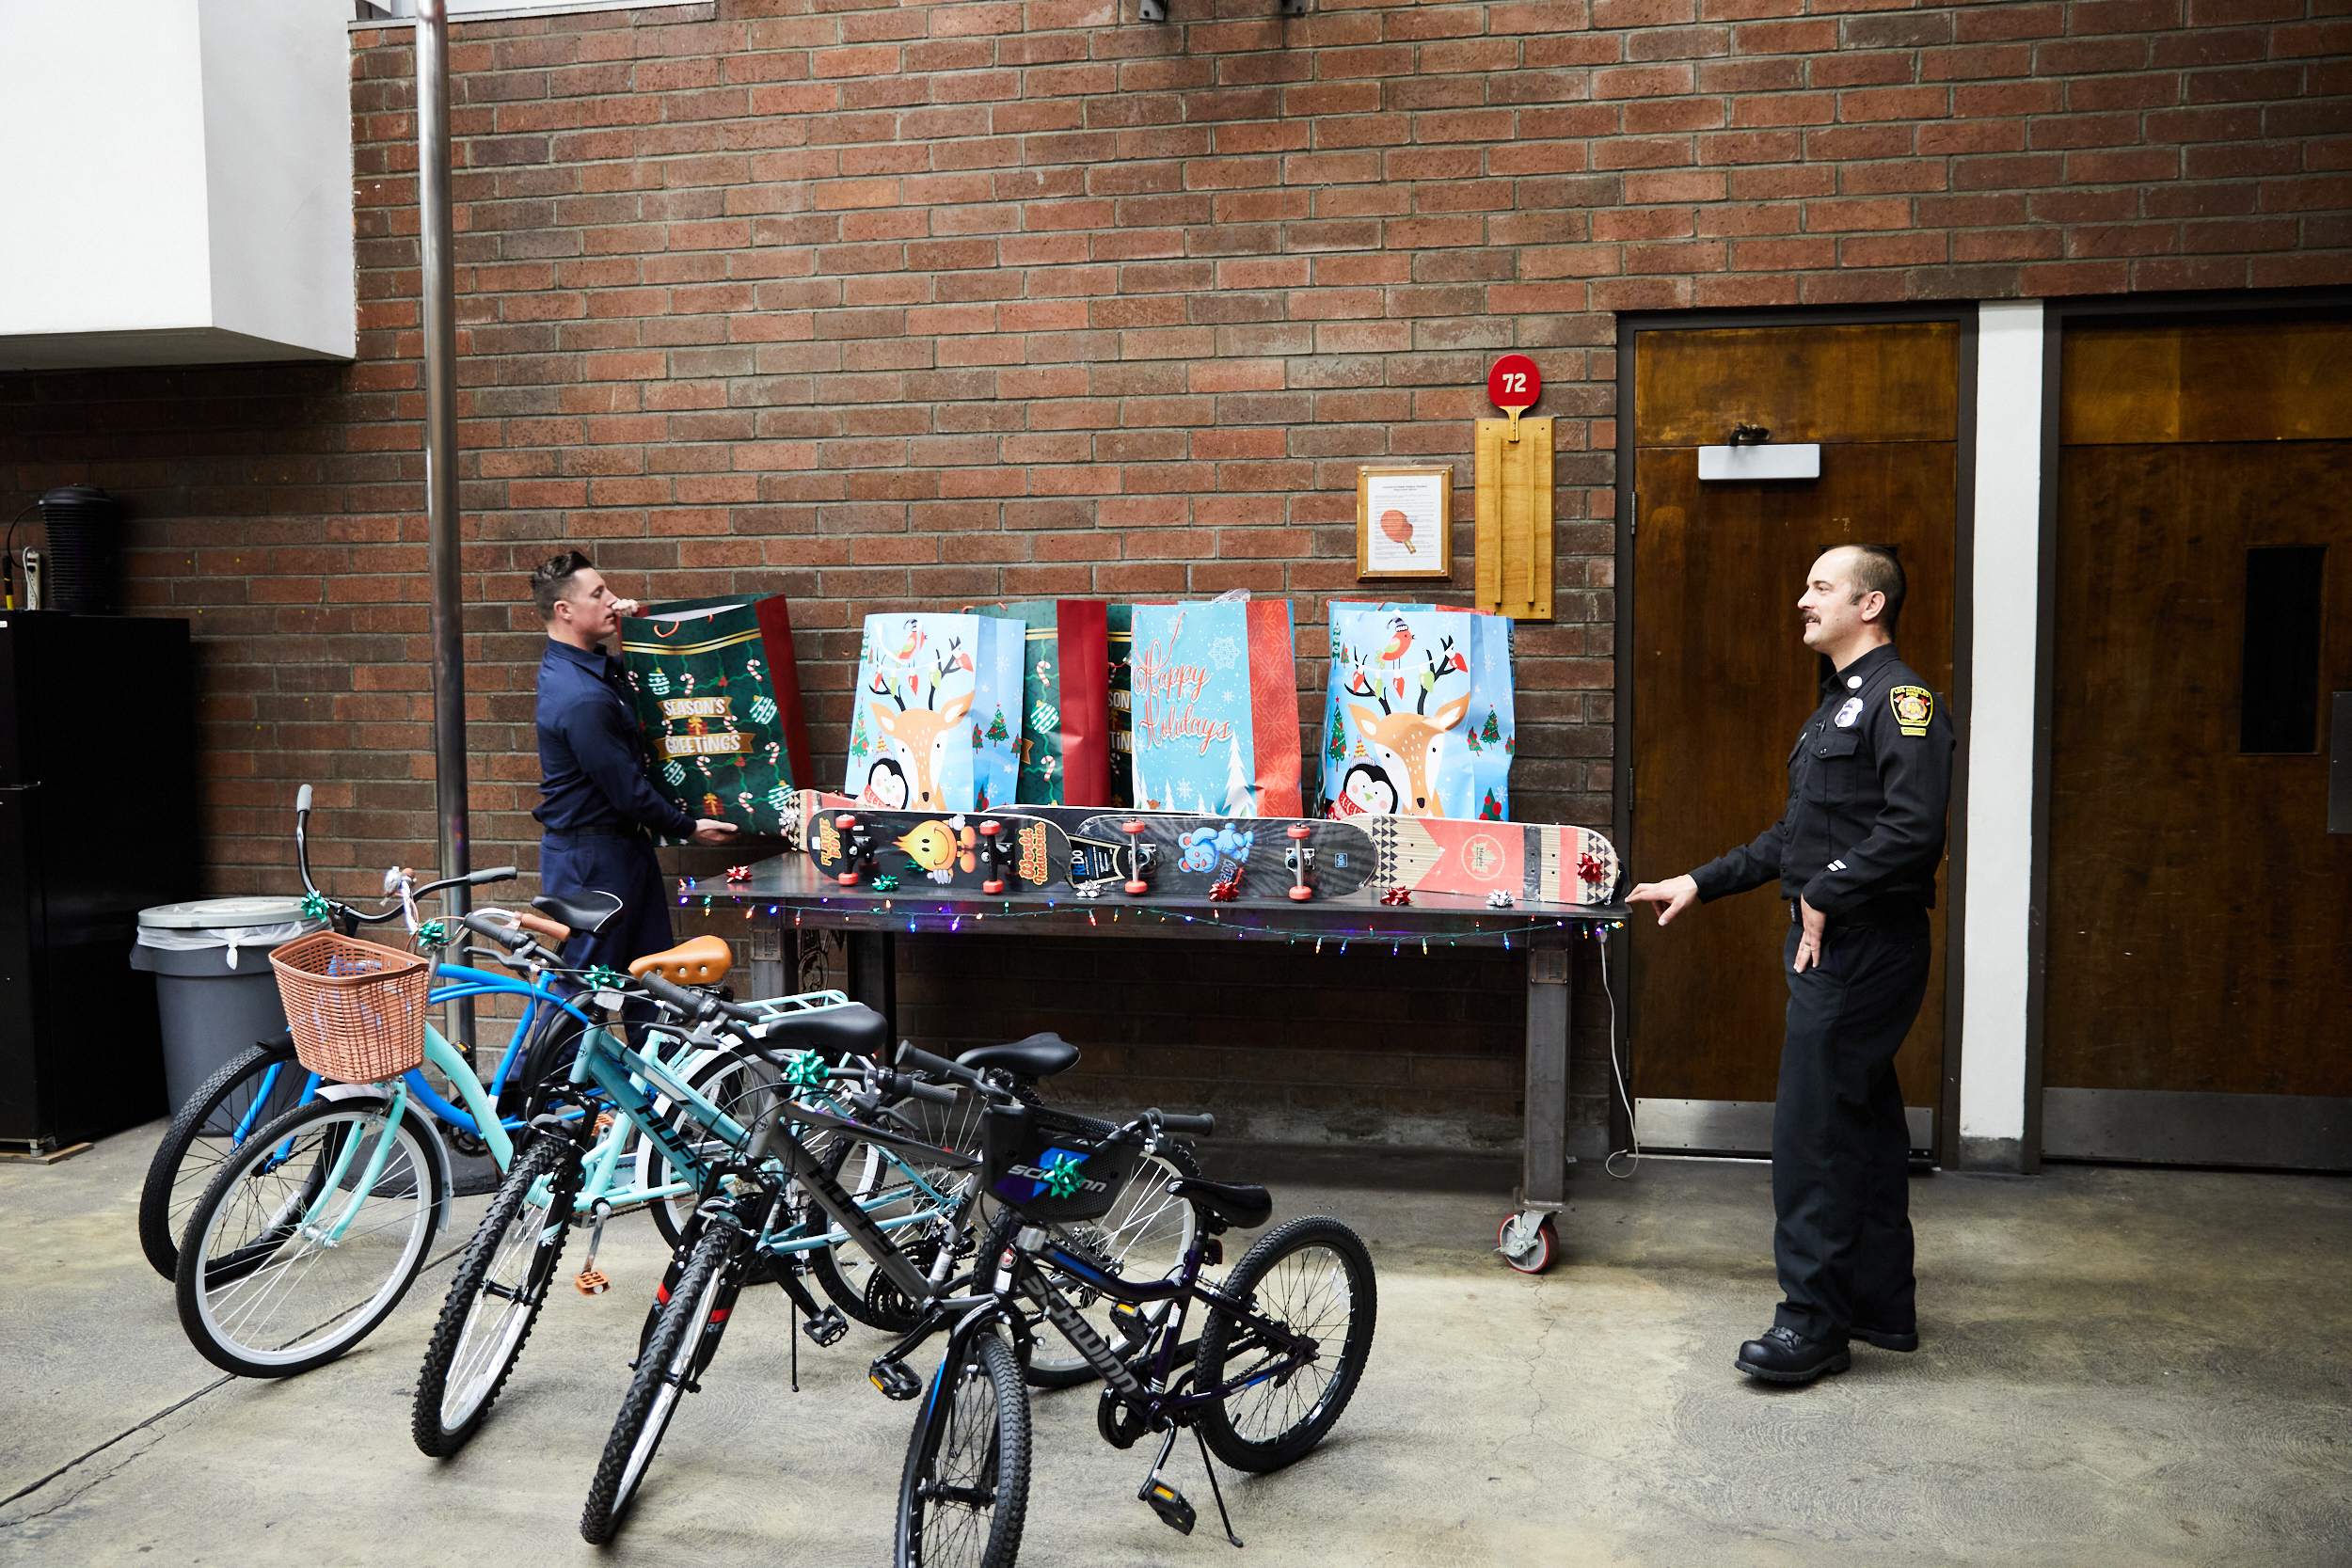 Firefighters pictured with unwrapped toys and sports equipment for the children